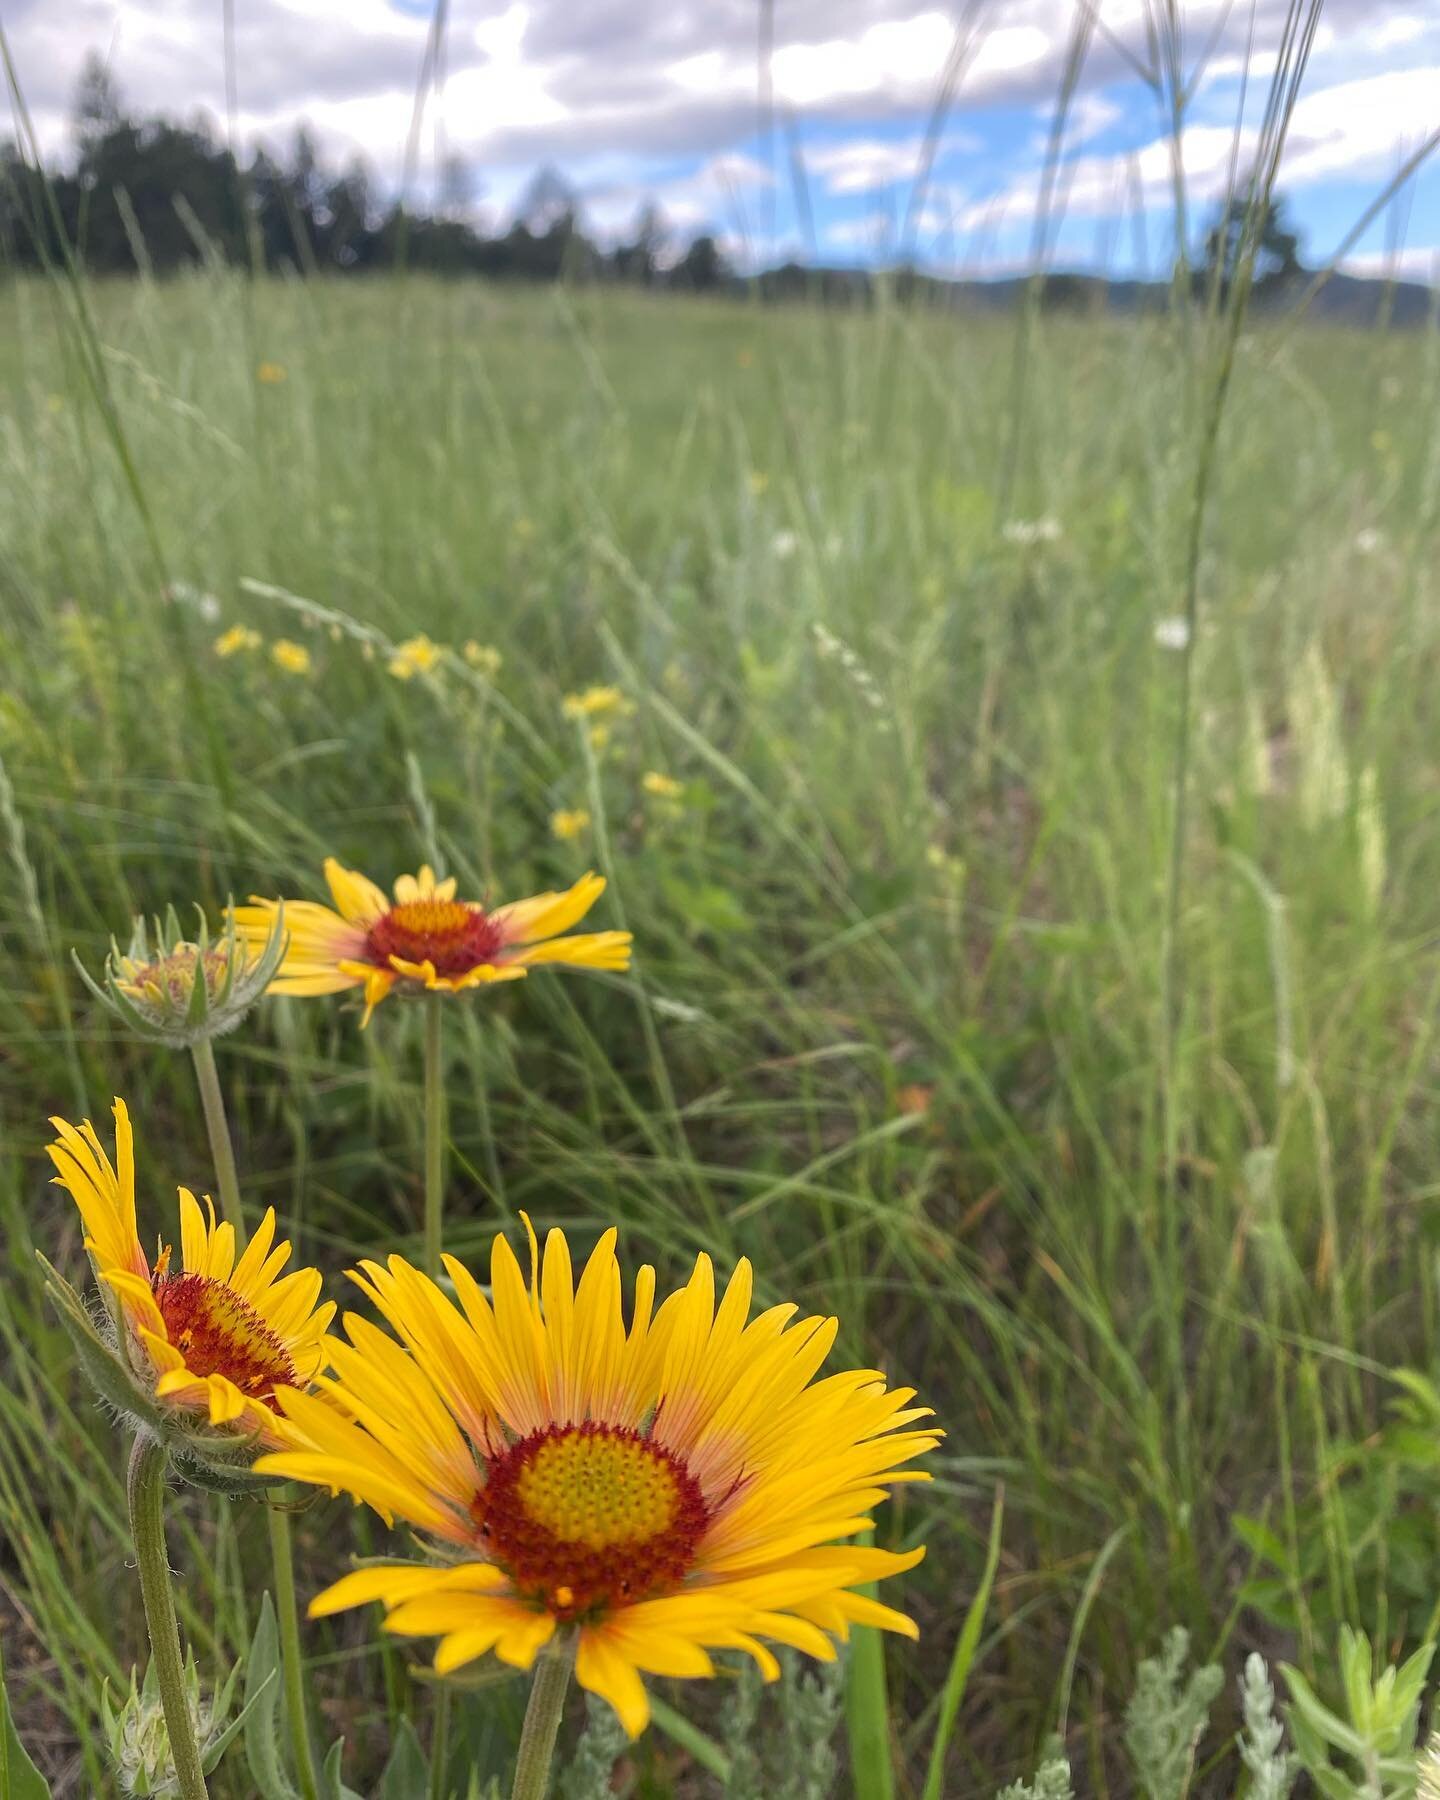 Happy Independence Day!
Grateful to live this wild life and enjoy this beautiful country we live in. 

May not be perfect or even that great, but as injustices continue to be brought to light, we grow. Take note from the wildflowers and reach for the